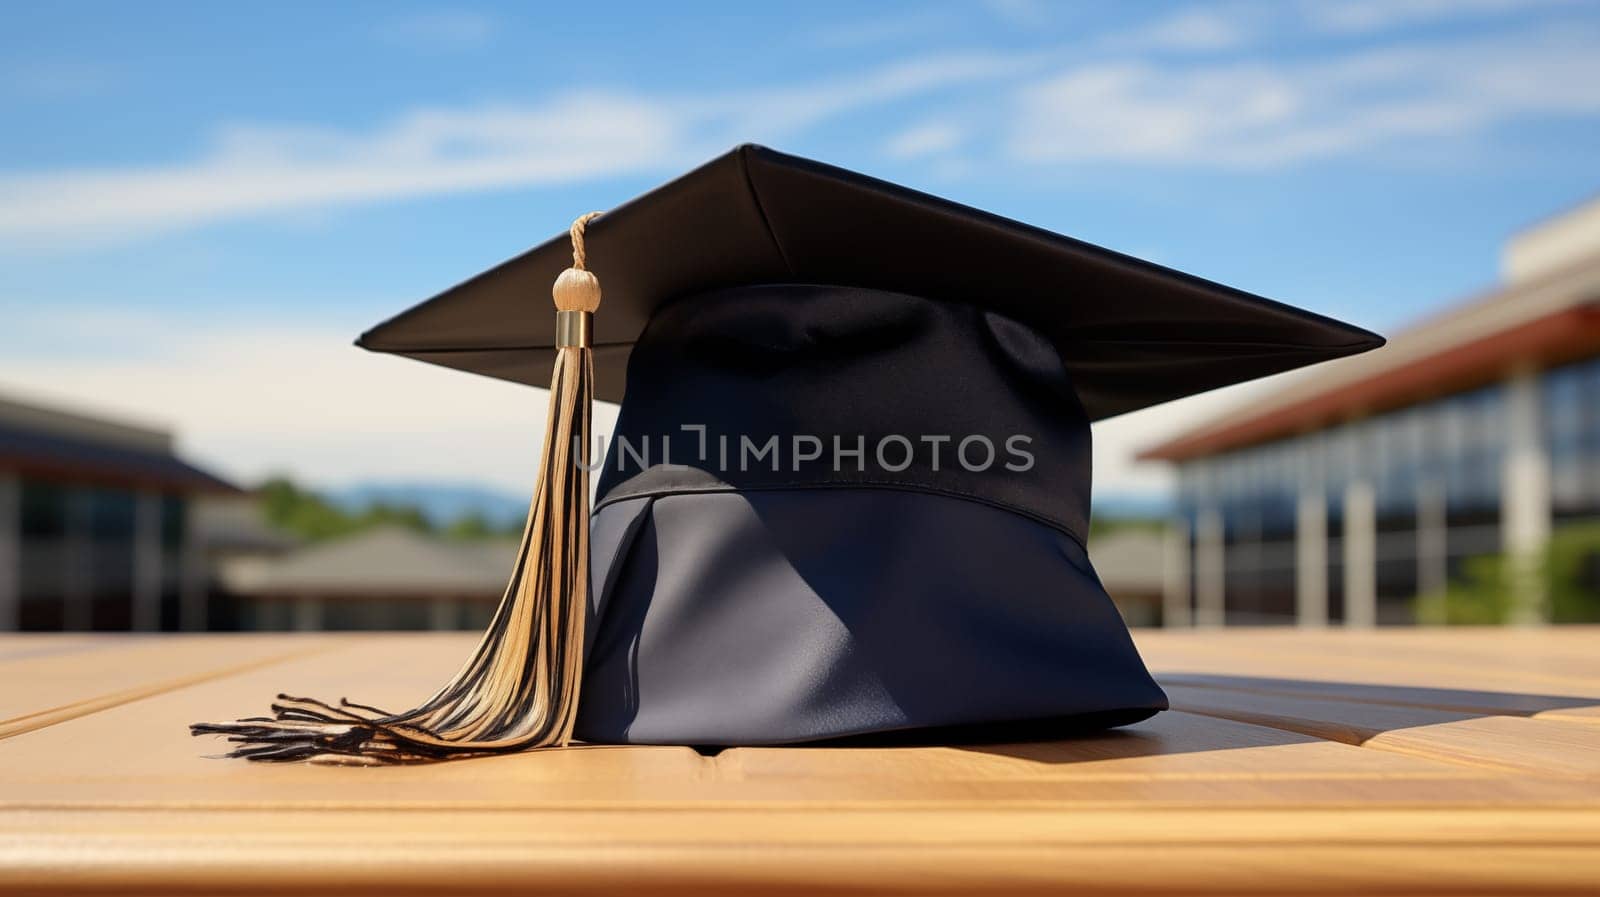 A graduation hat with a tassel lies on a table outside against a blue sky background.